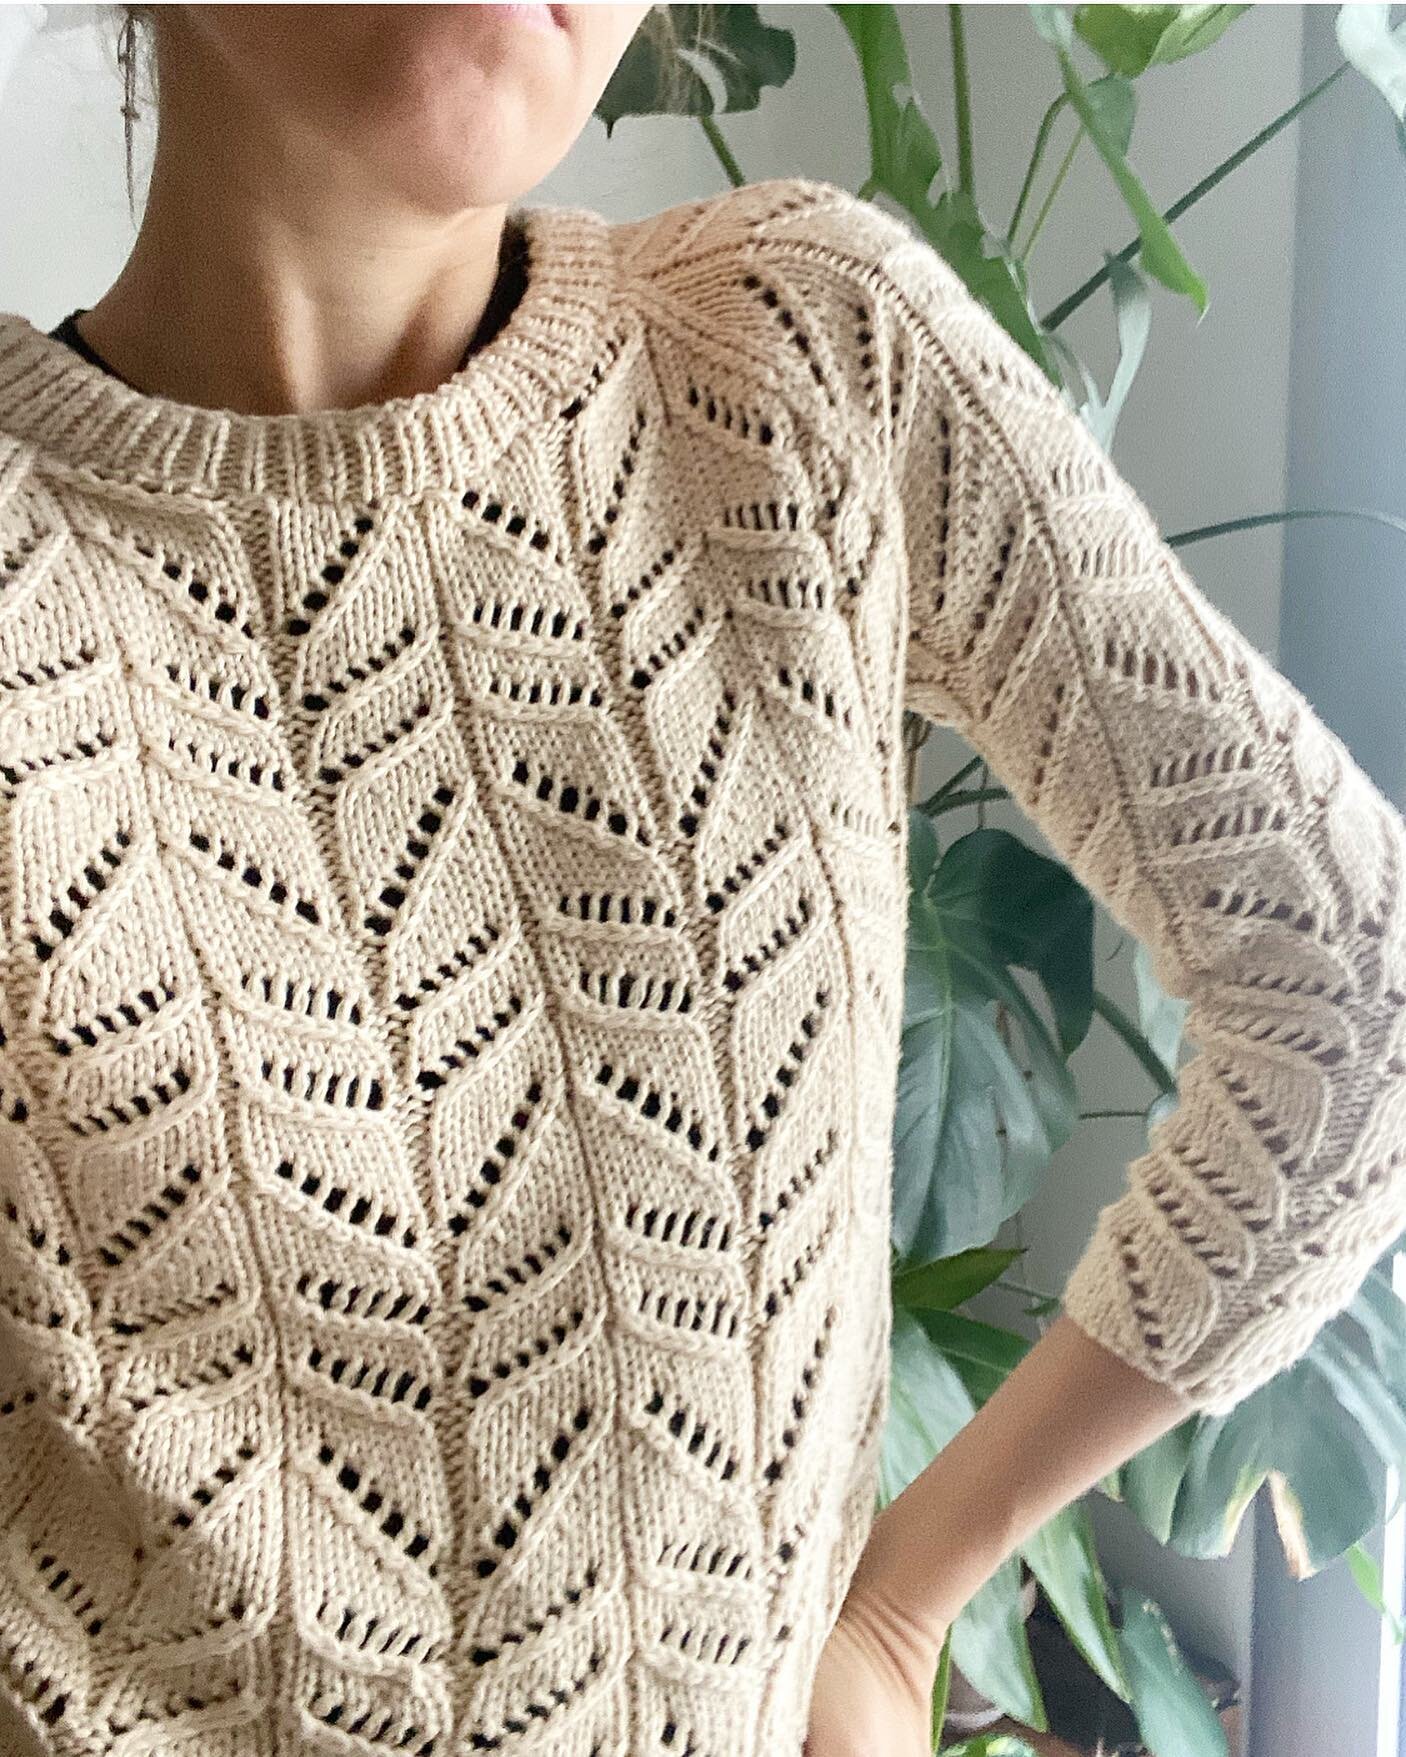 Love love love this one #ambersweater is almost ready to be tested 💘🌿
Bon weekend !
#trustthemojo #trustthemojopattern #knit #knitting #knitwear #knittersofinstagram #katiayarns #laceknitting #contemporaryknitting #tricot #jeportecequejetricote